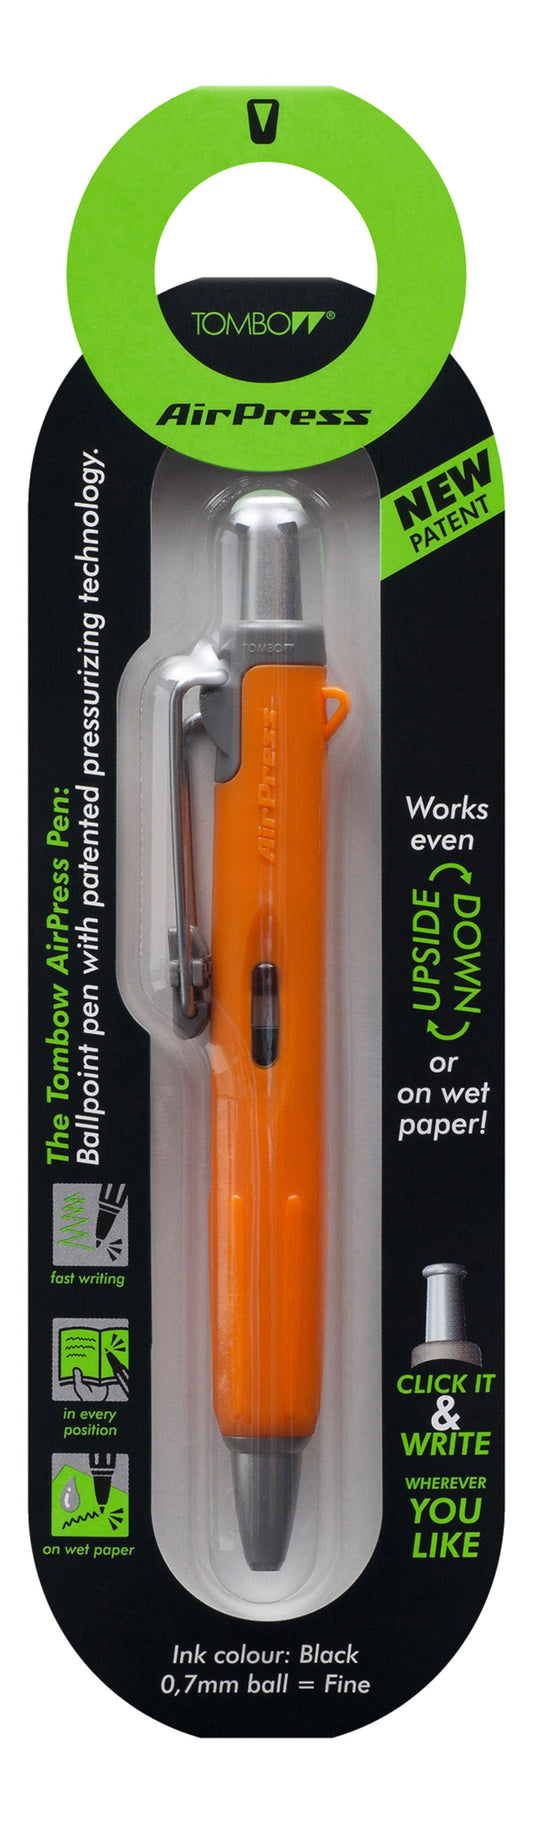 Tombow AirPress Retractable Ballpoint Pen 0.7mm Tip Orange Barrel Black Ink - BC-AP54 - NWT FM SOLUTIONS - YOUR CATERING WHOLESALER